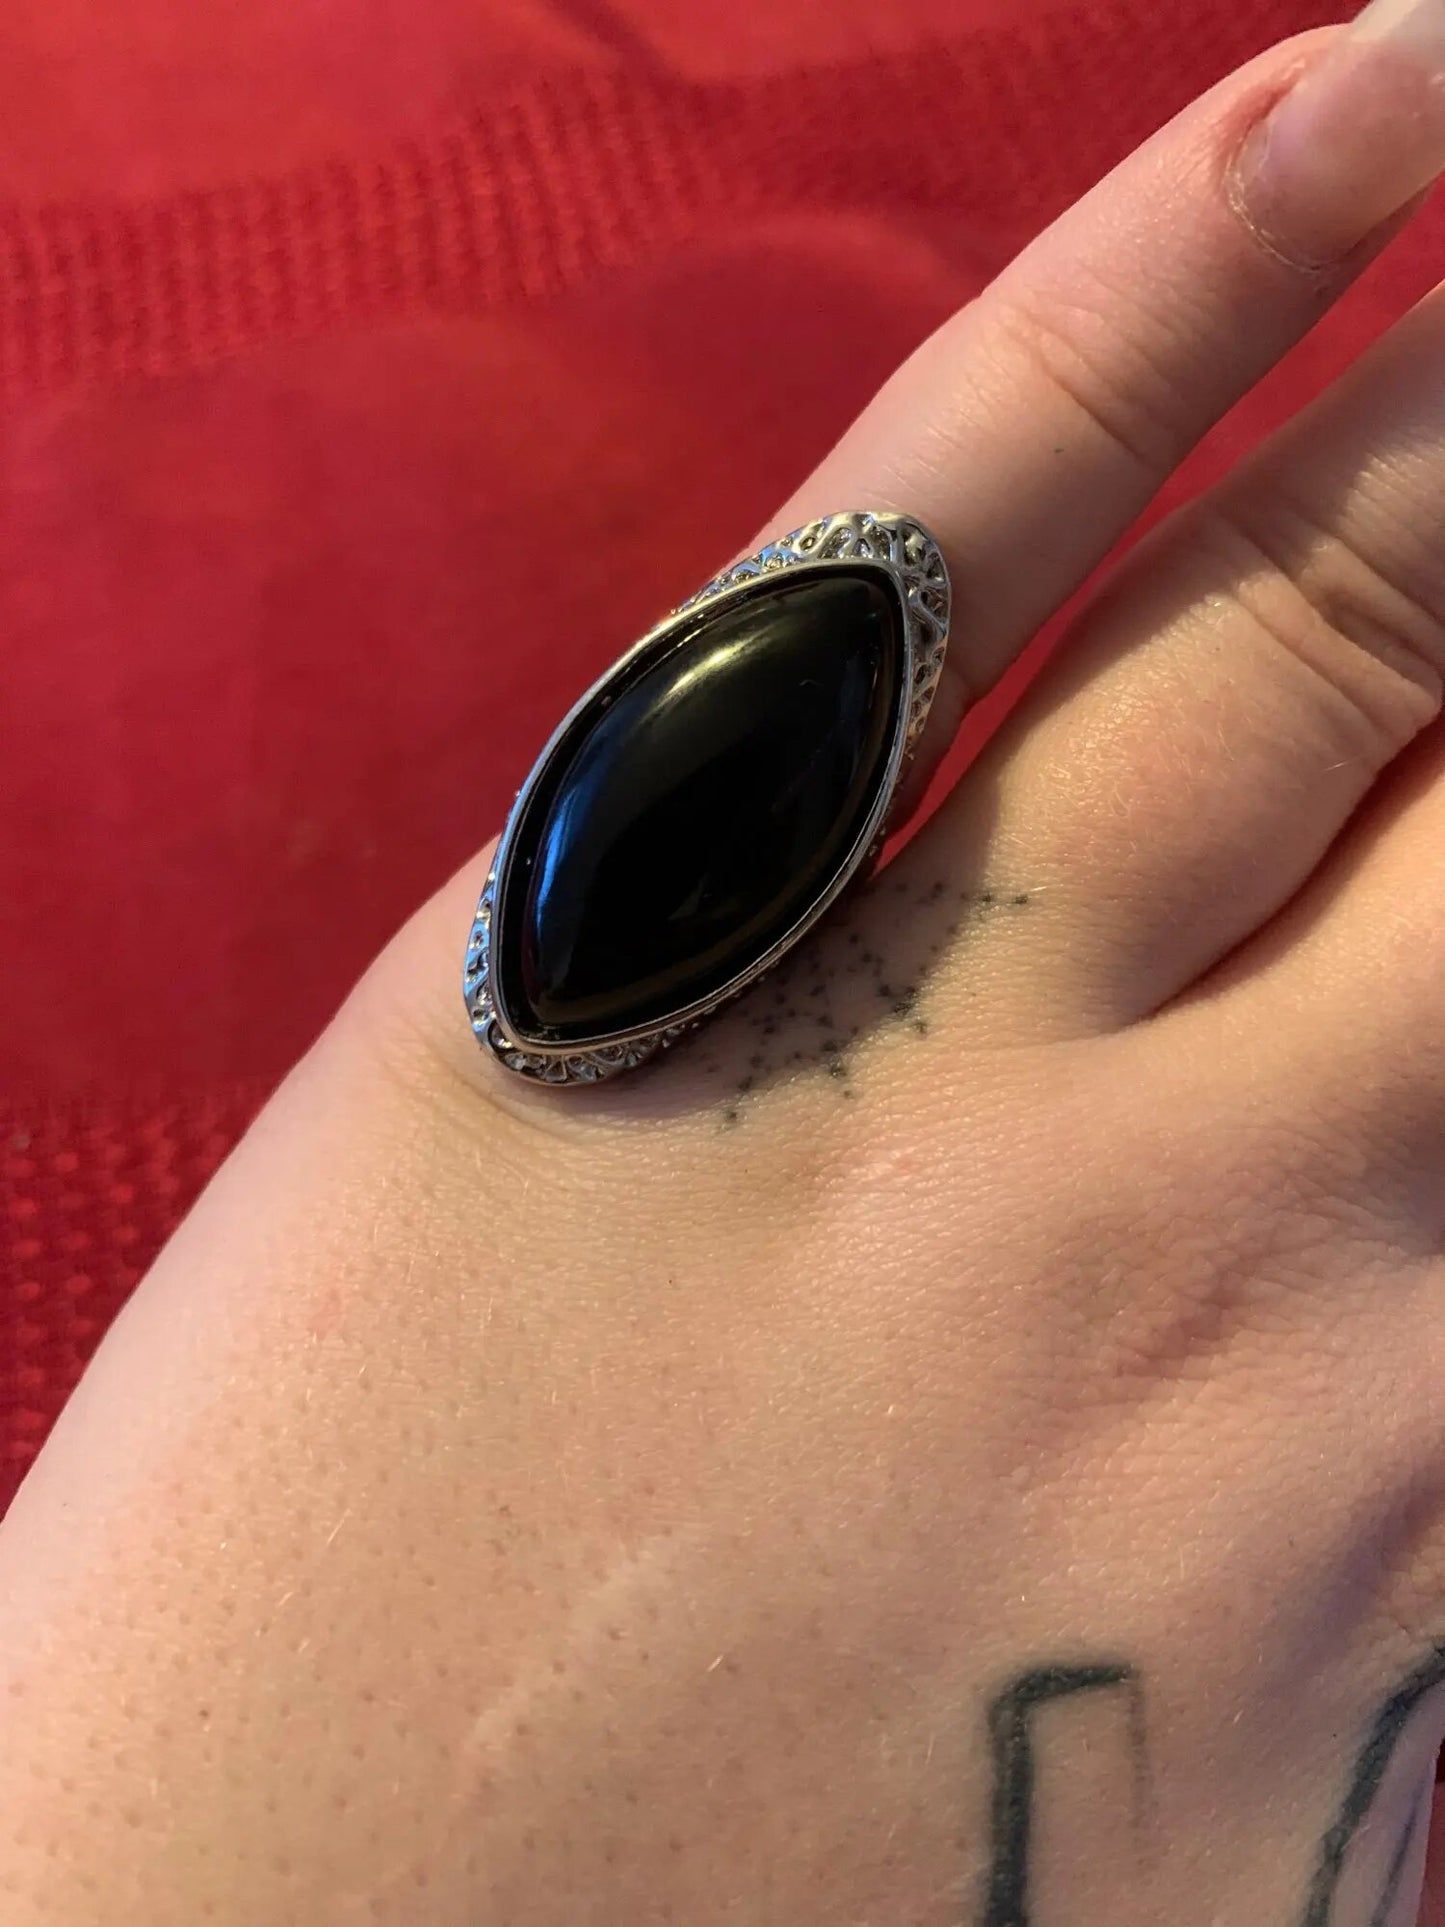 Natural Black 27mm Stone Hollow Antique Silver Ring